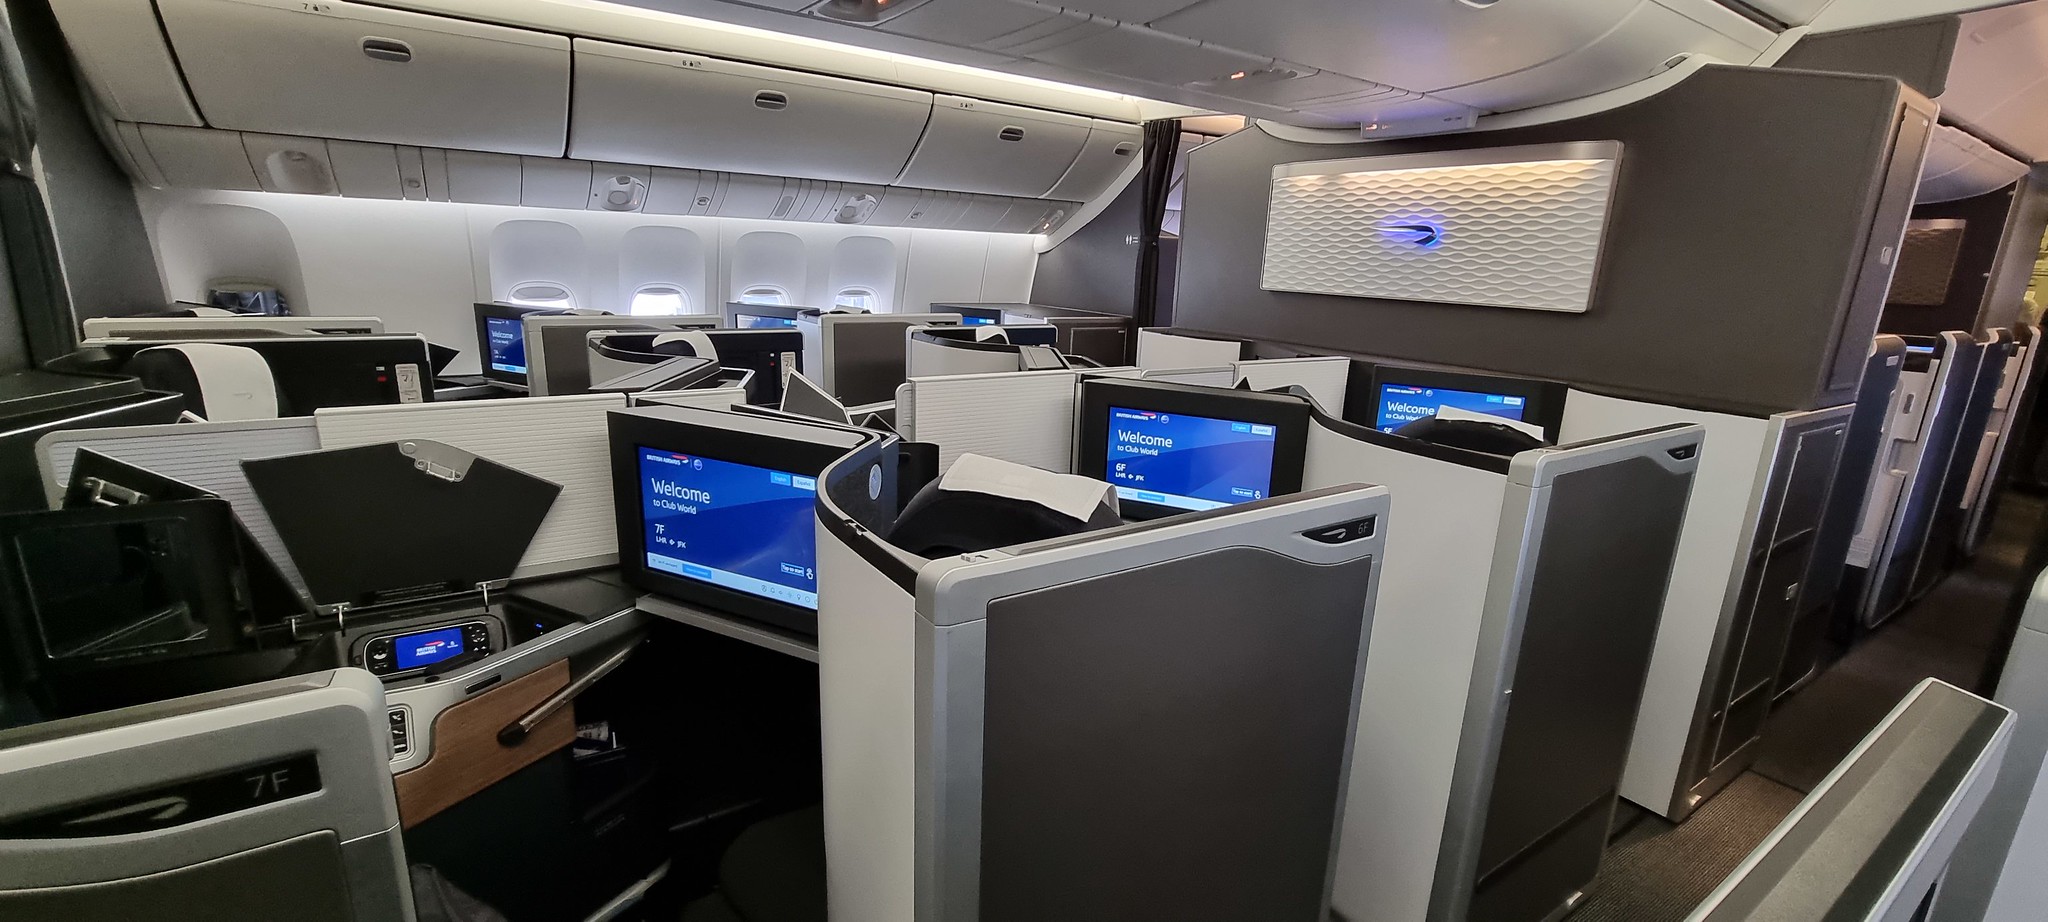 At least it was the new Club World suite on board this 777-300 service to New York JFK